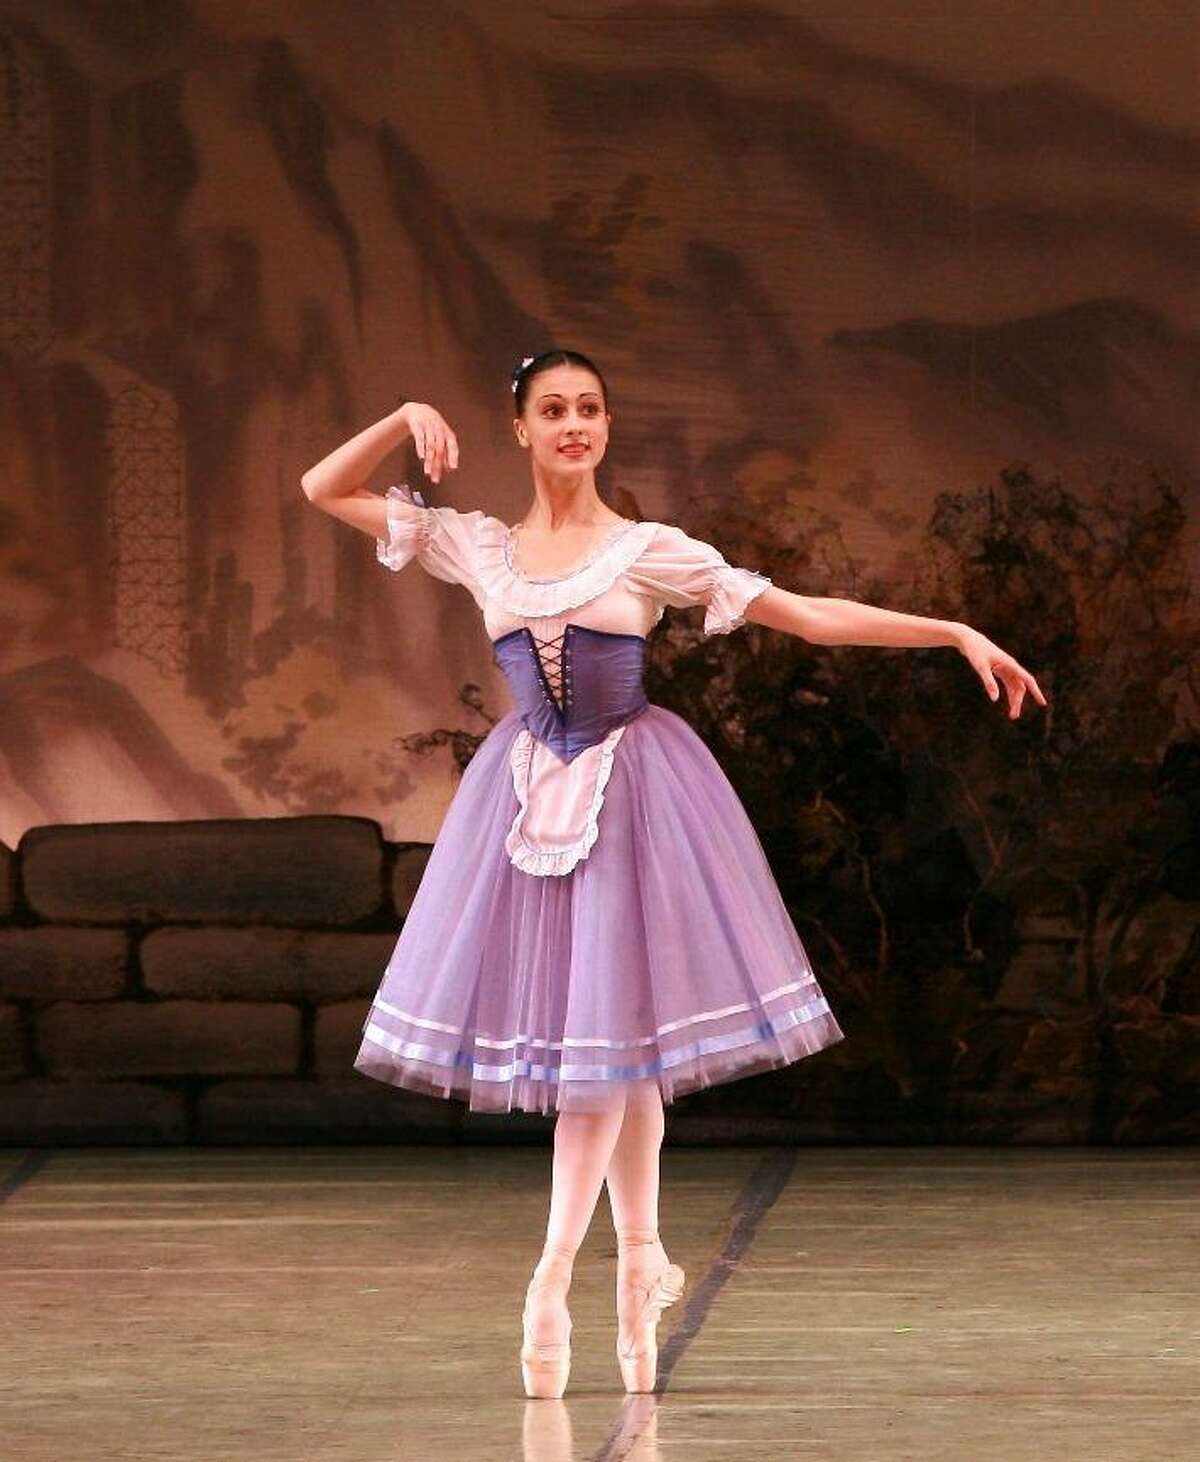 A traditional version, above, of the ballet classic “Giselle” by the Moscow Festival Ballet will be presented April 6 at the Quick Center in Fairfield.